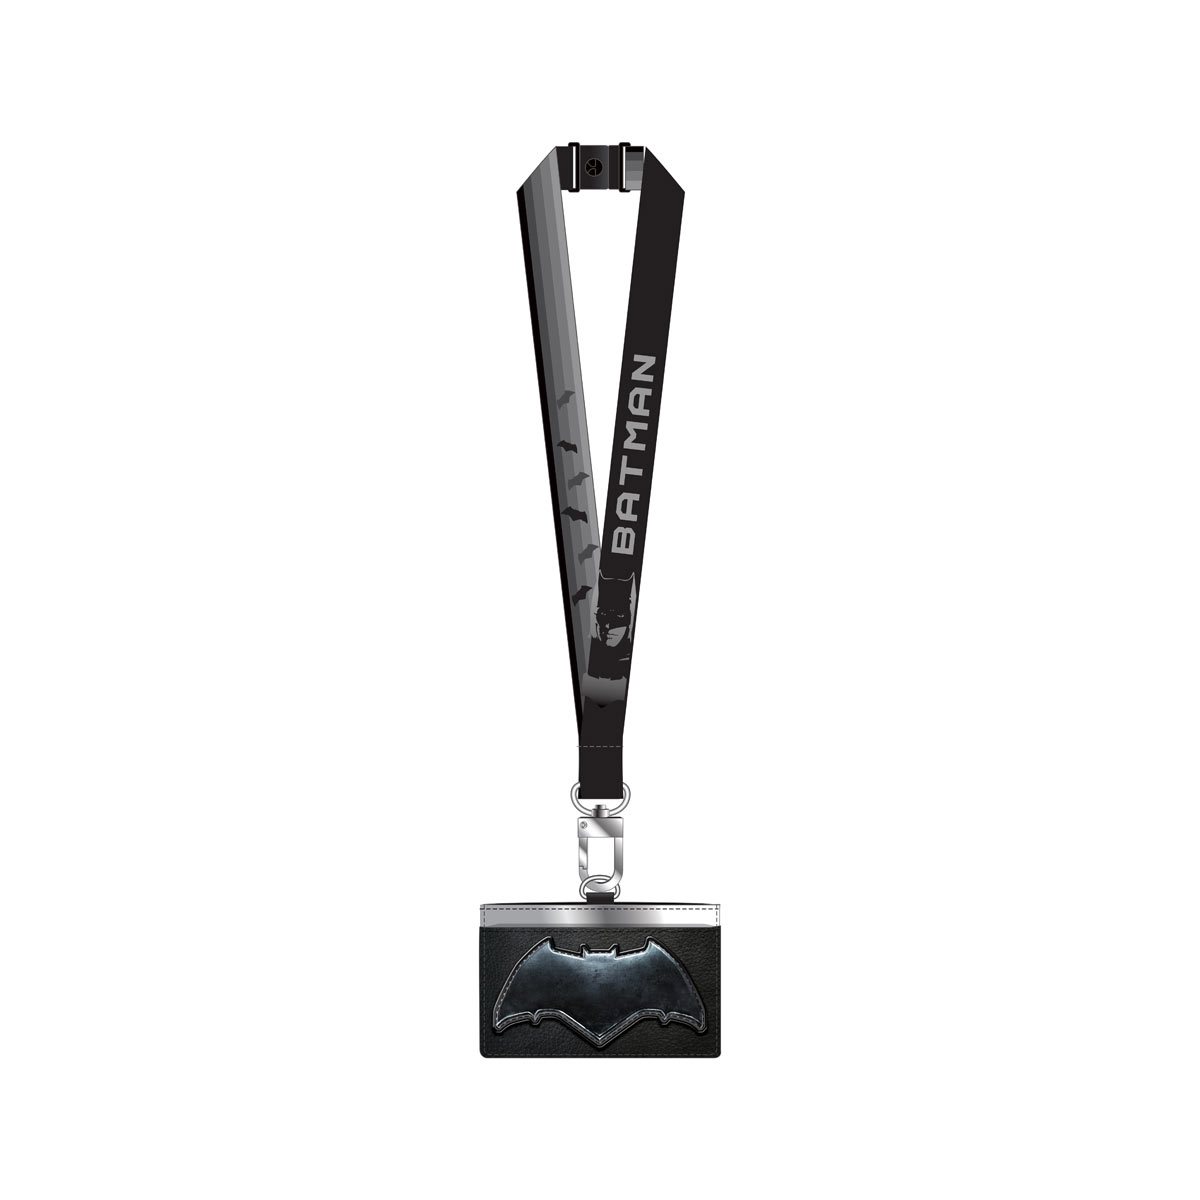 Batman Deluxe Lanyard with Card Holder - Entertainment Earth